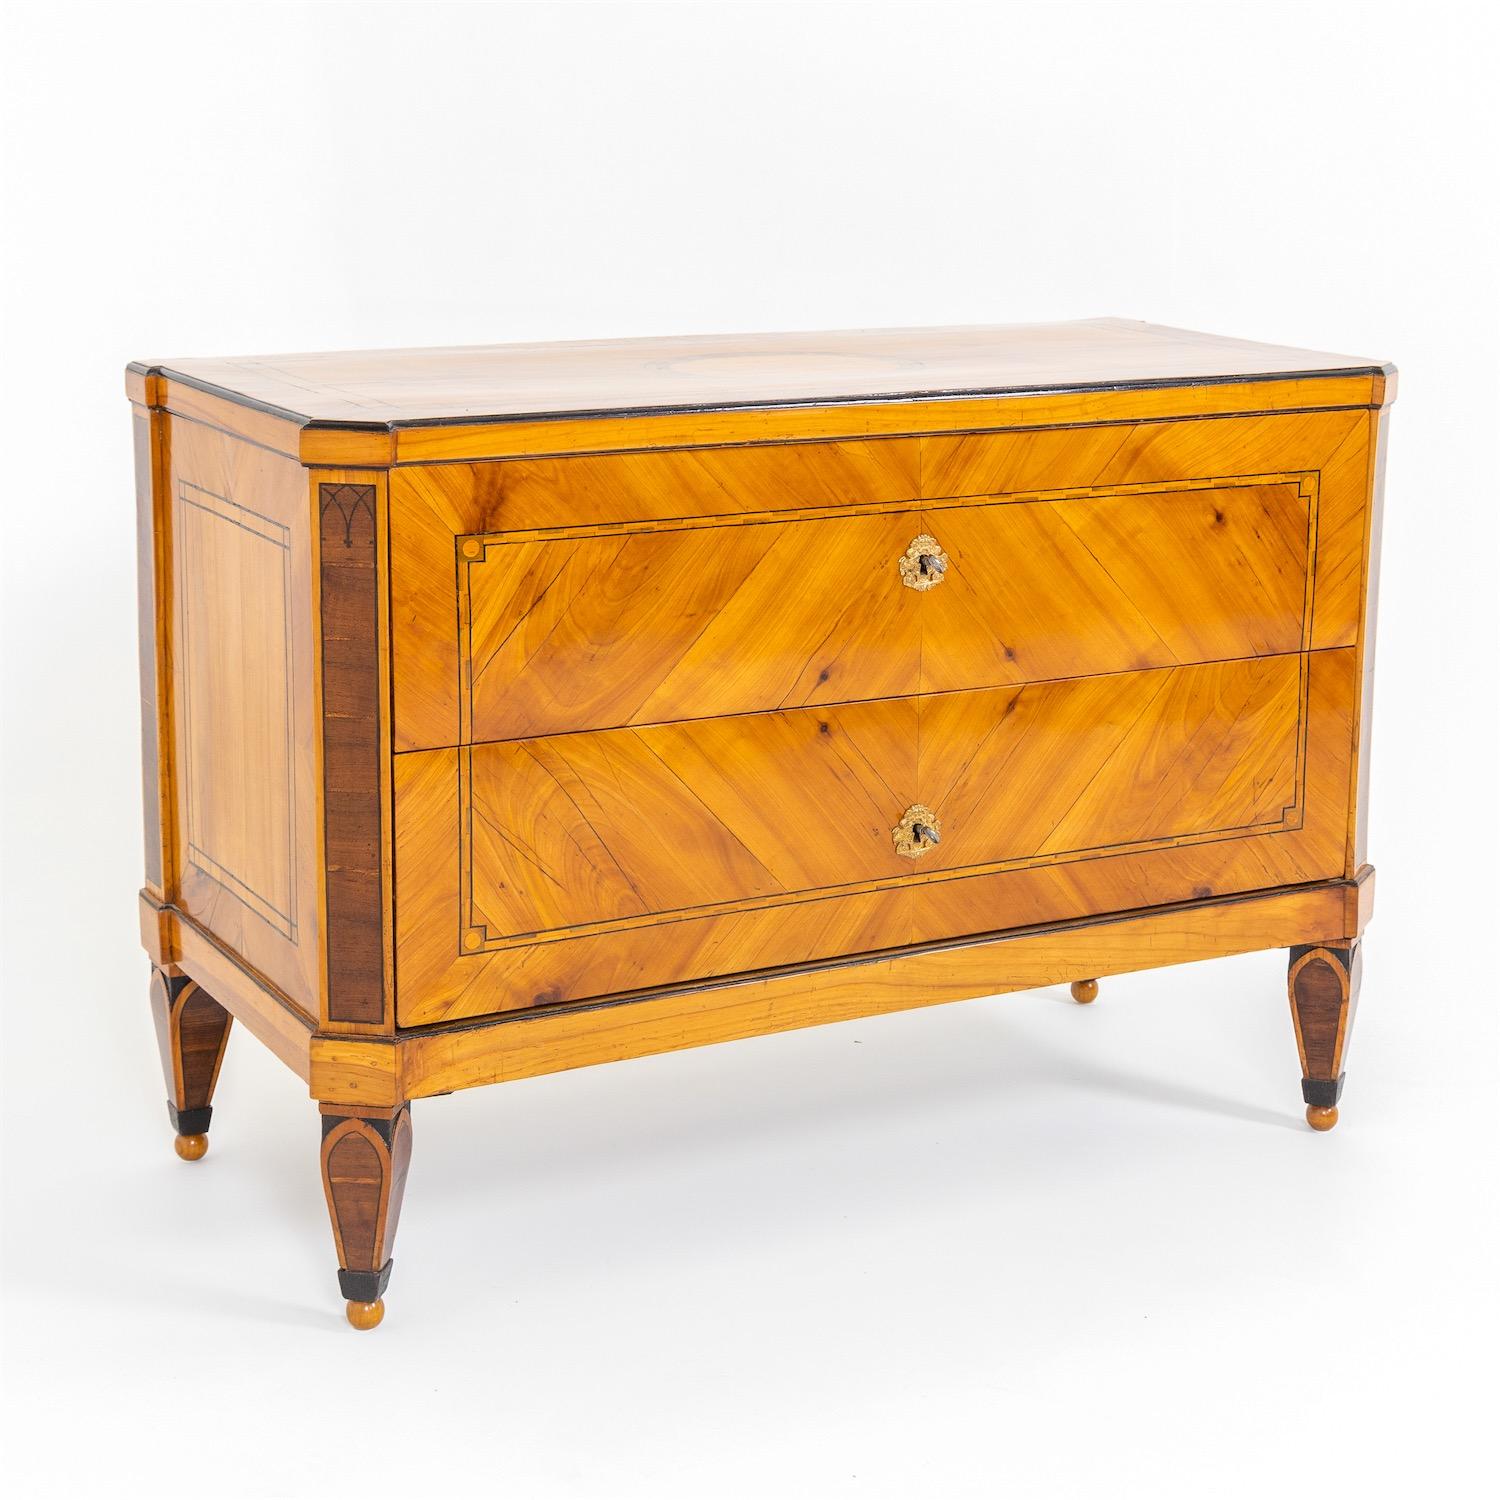 Neoclassical chest of drawers on square pointed legs with accentuated arche shapes and ball feet. The beveled, slightly cranked corners are decorated with additional lancette arches and inlaid in dark stained wood. The two drawers are constructed